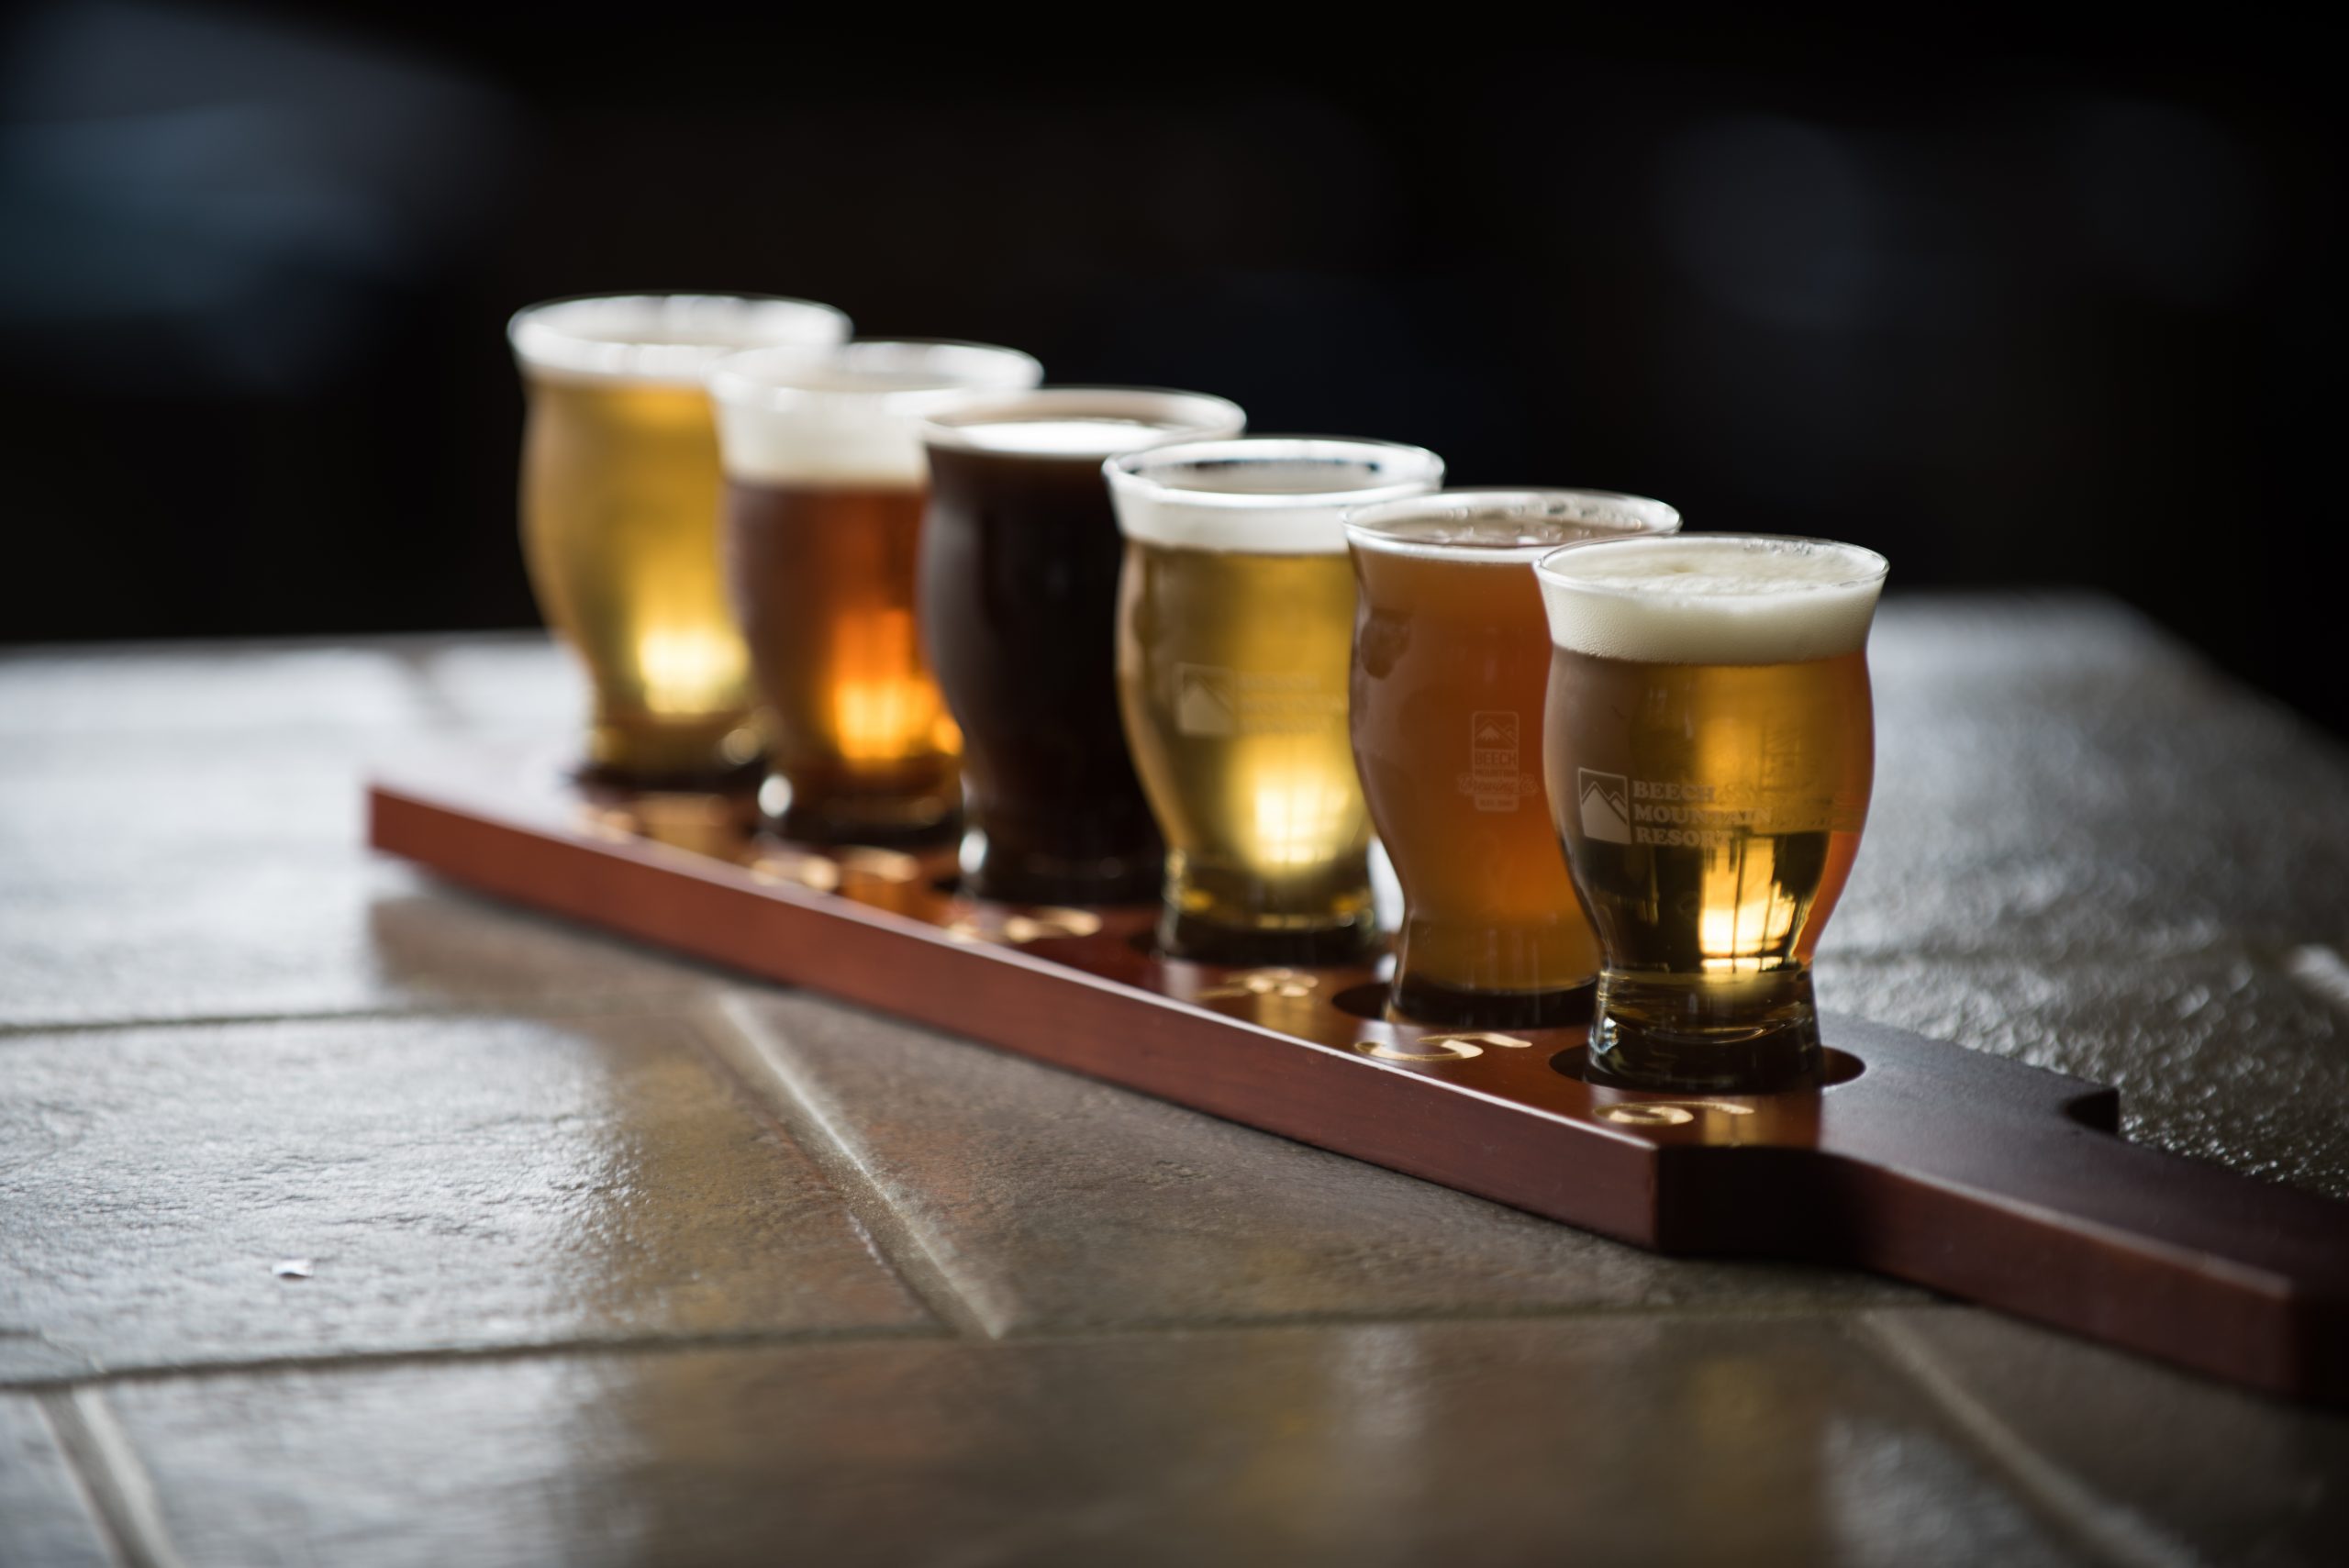 A beer flight at Beech Mountain Brewing Co. includes a variety of ales brewed on-site, ranging from dark Patroller Porter to the award-winning Beech Blonde.